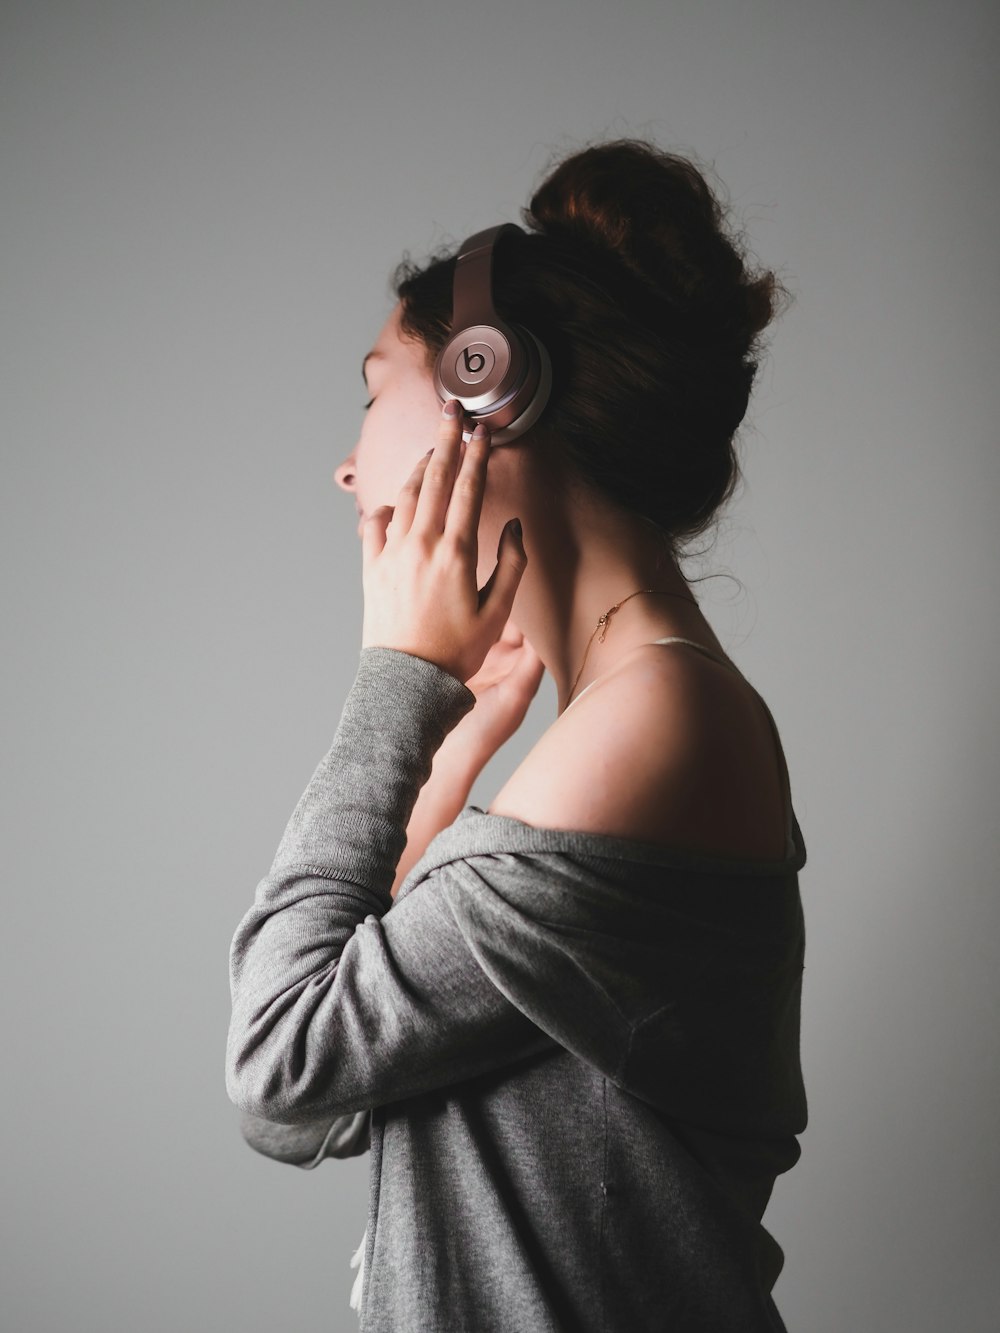 1500+ Listening To Music Pictures | Download Free Images on Unsplash